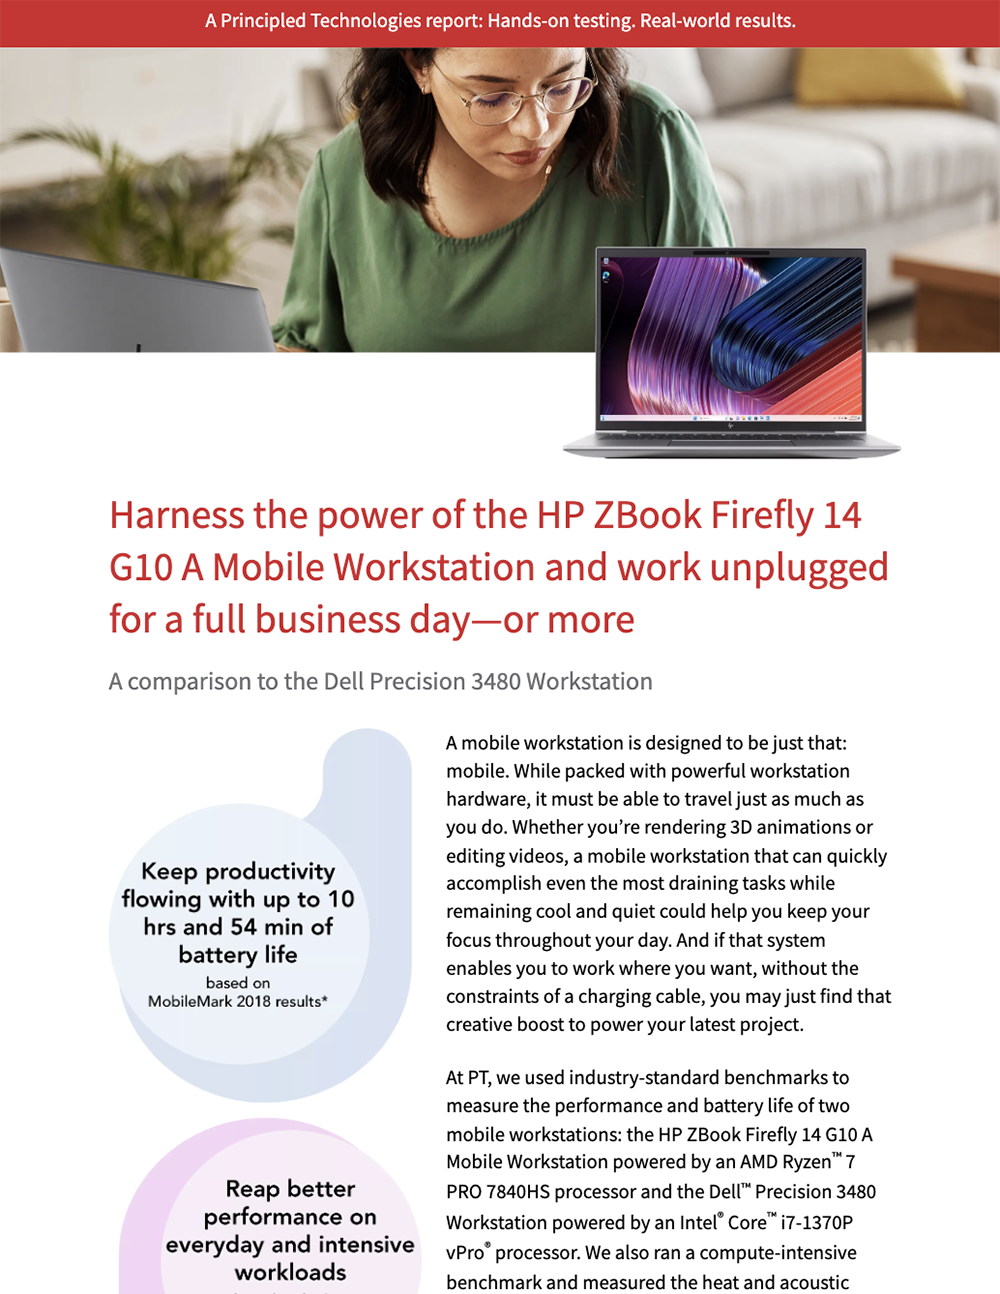  Harness the power of the HP ZBook Firefly 14 G10 A Mobile Workstation and work unplugged for a full business day—or more